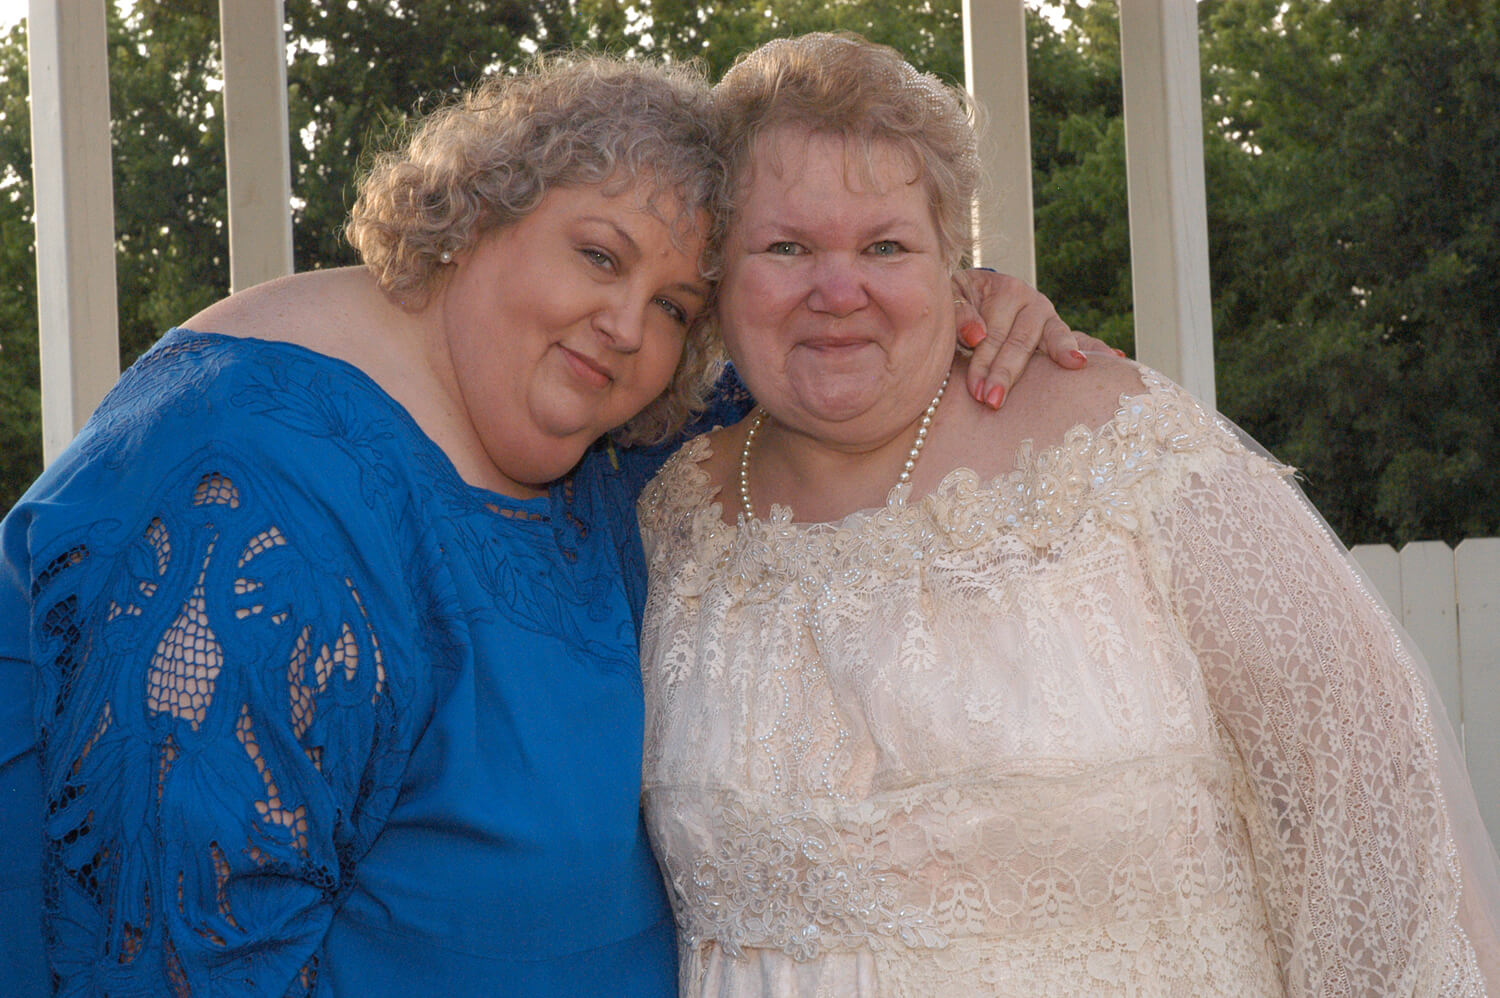 Still from All of Me. Two women pose in front of the camera, the woman on the left has a blue dress and hugs the woman to her right. The woman on the right is wearing a pearl-white dress, and smiles at the camera.